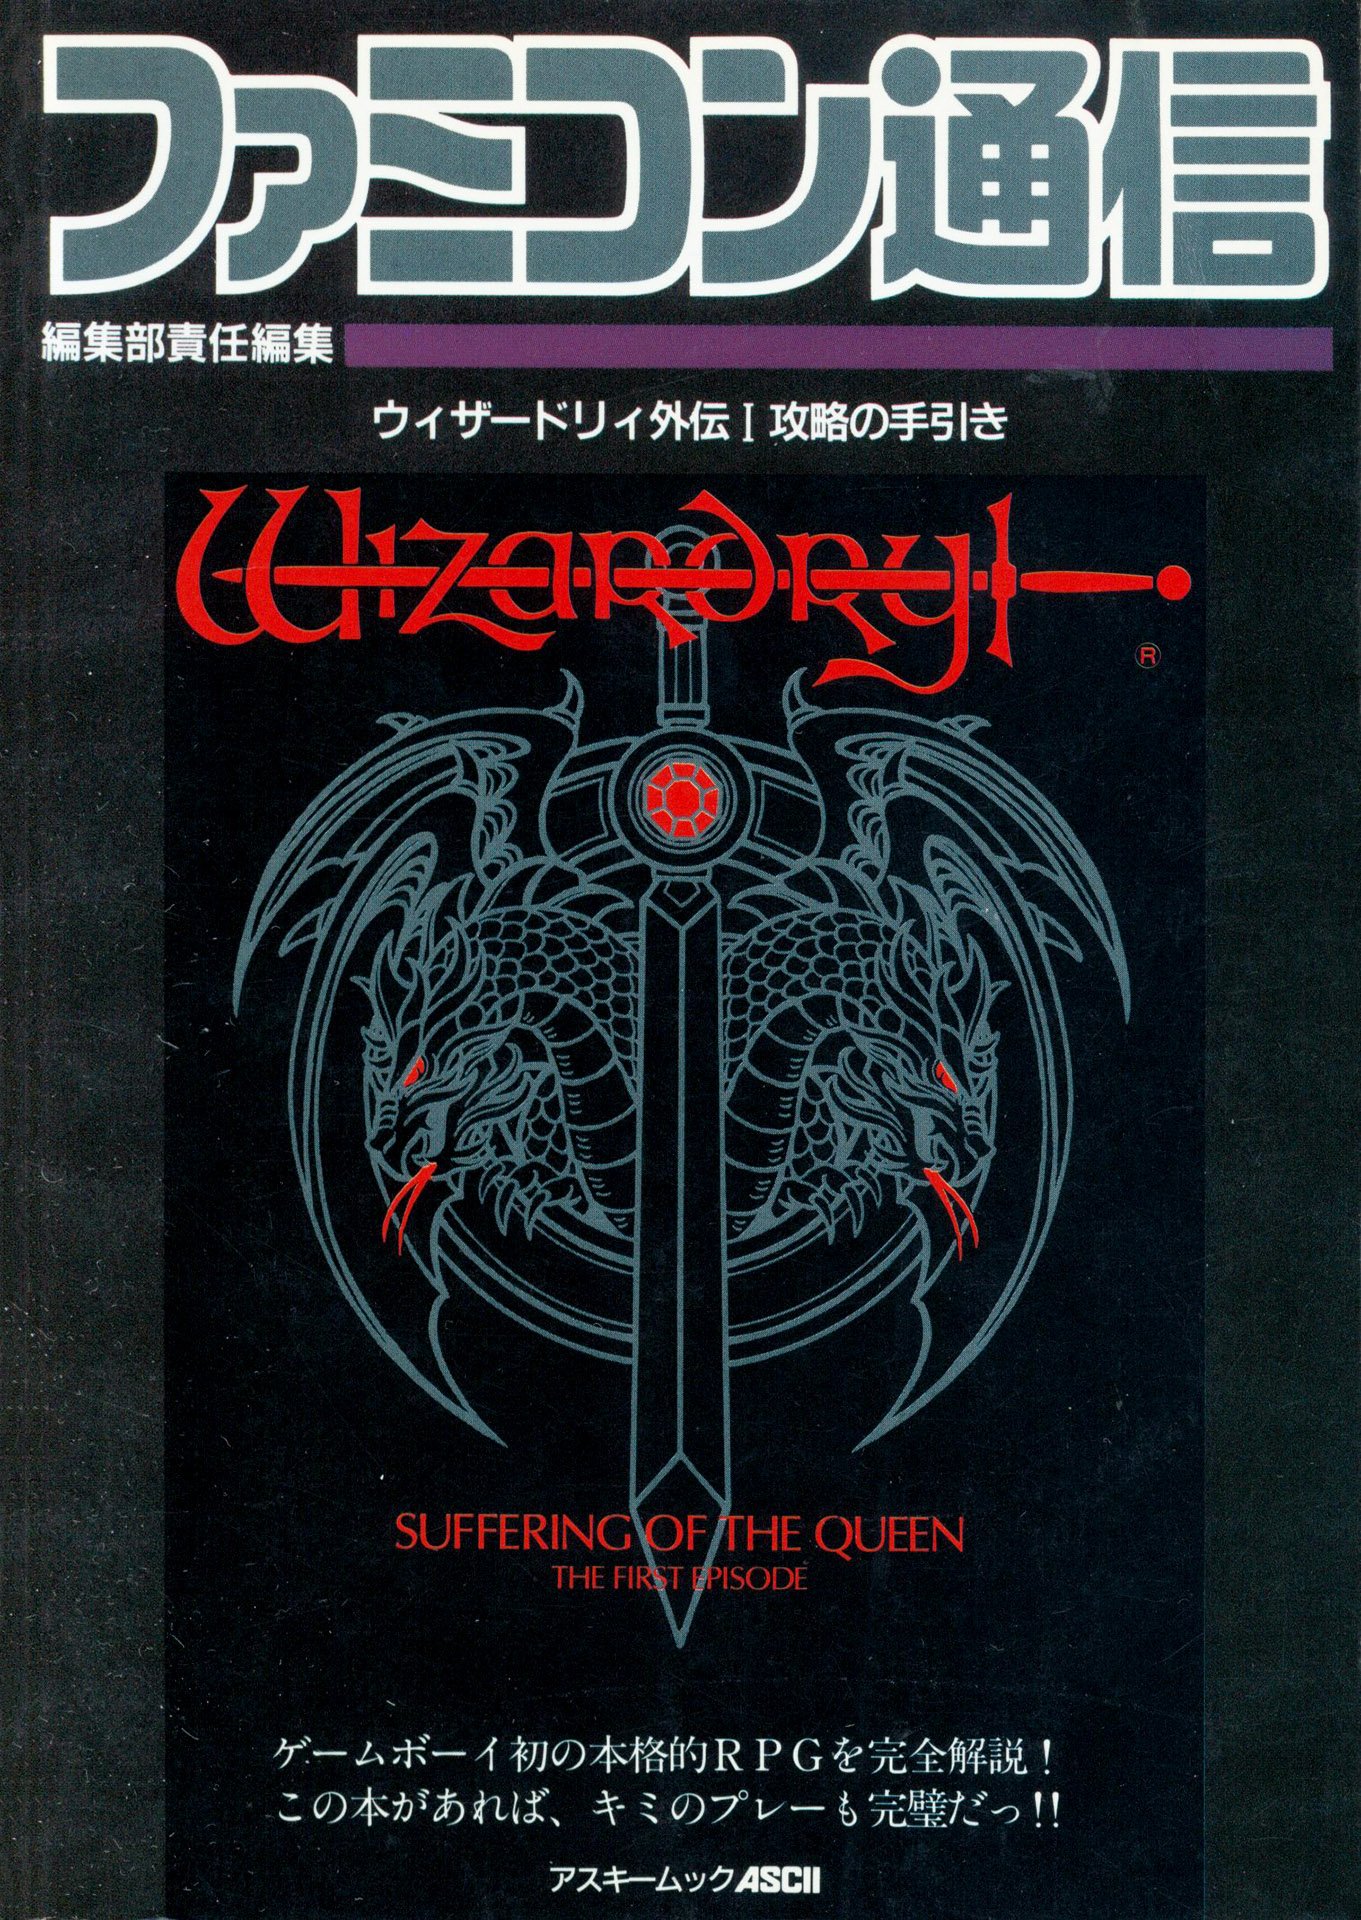 Wizardry Gaiden I Famitsu Strategy Guide Japanese Language Guides Retromags Community